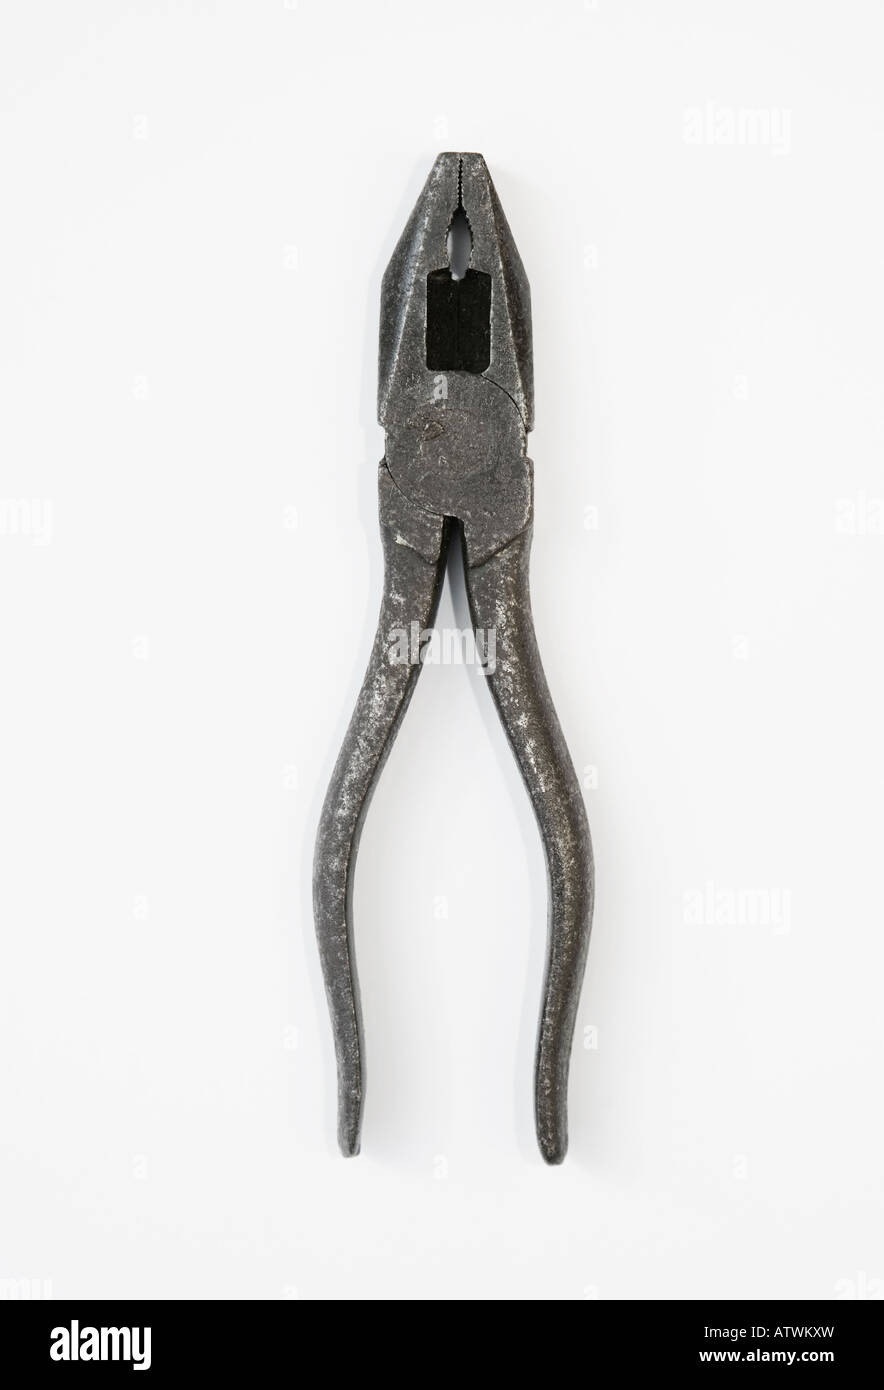 VIntage pliers against a white background Stock Photo